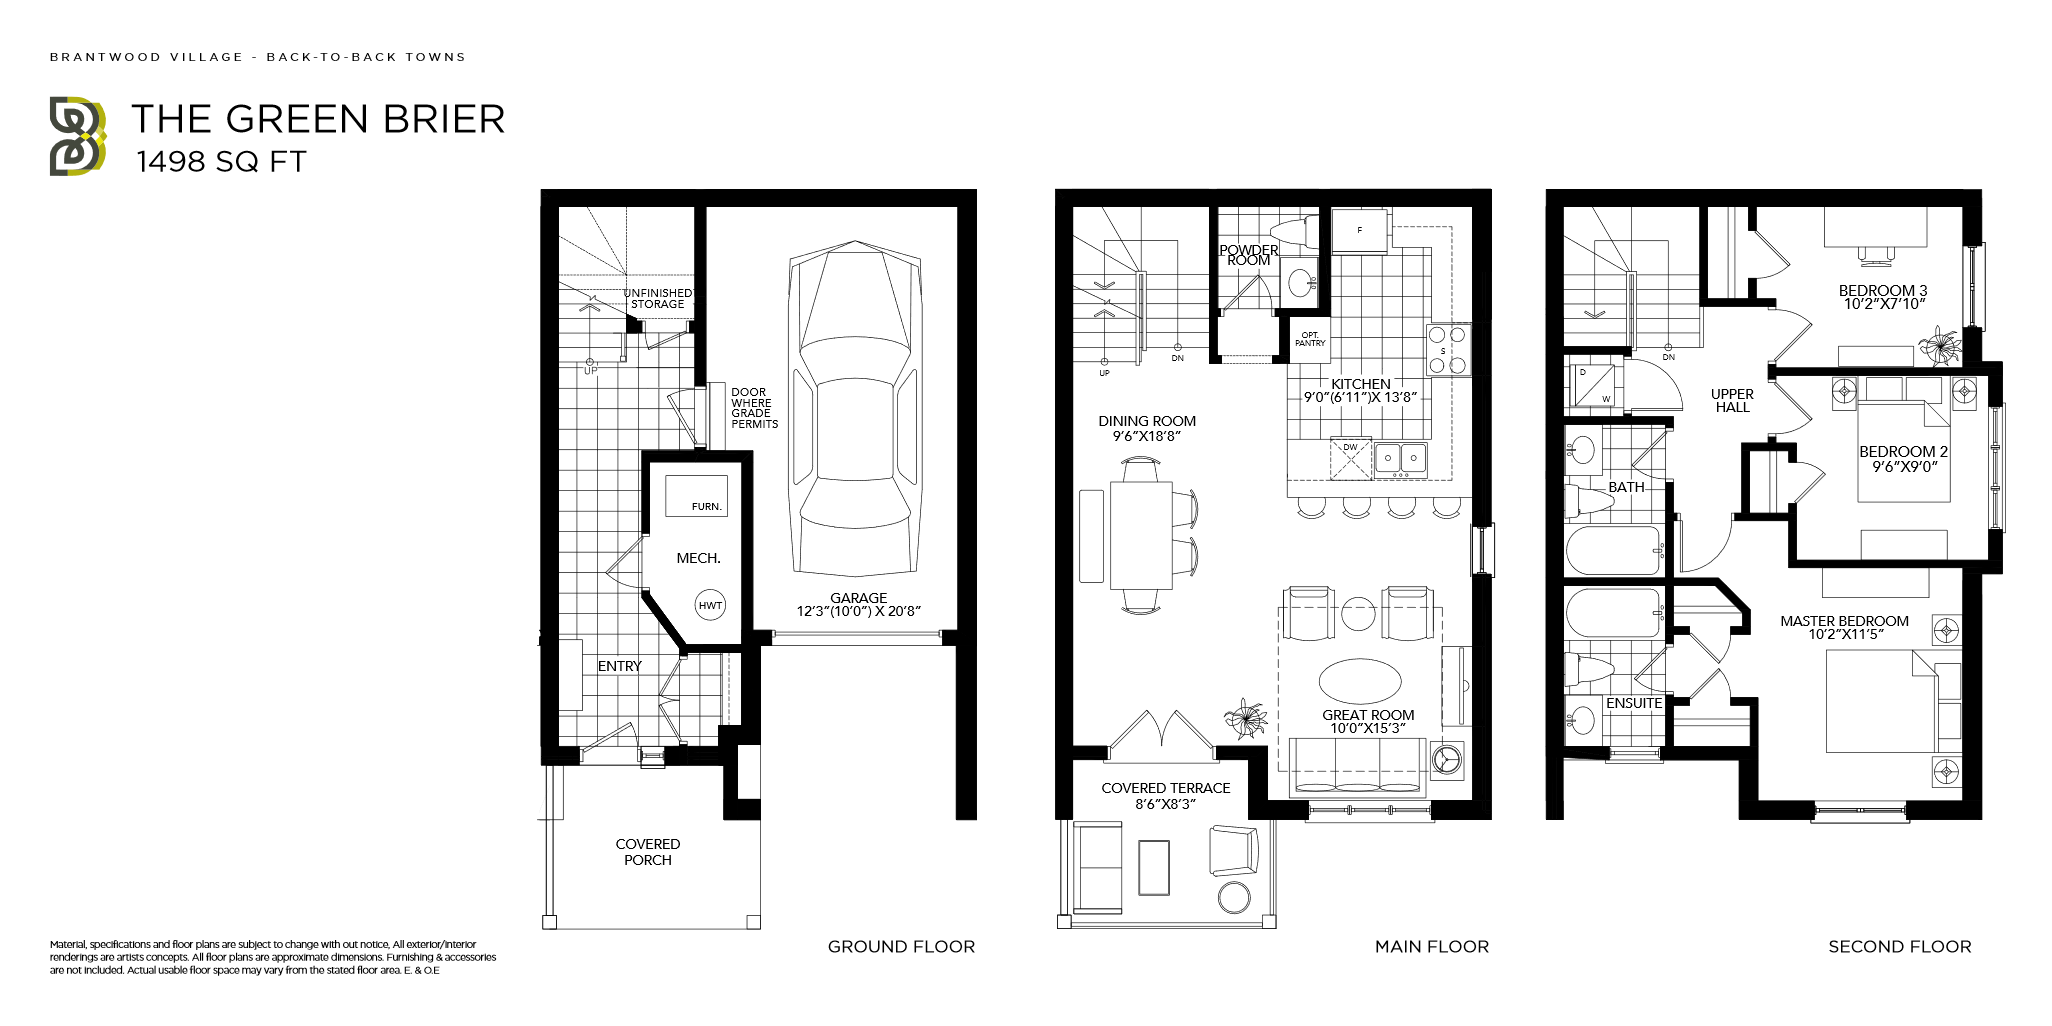  Green Brier  Floor Plan of Brantwood Village Towns with undefined beds